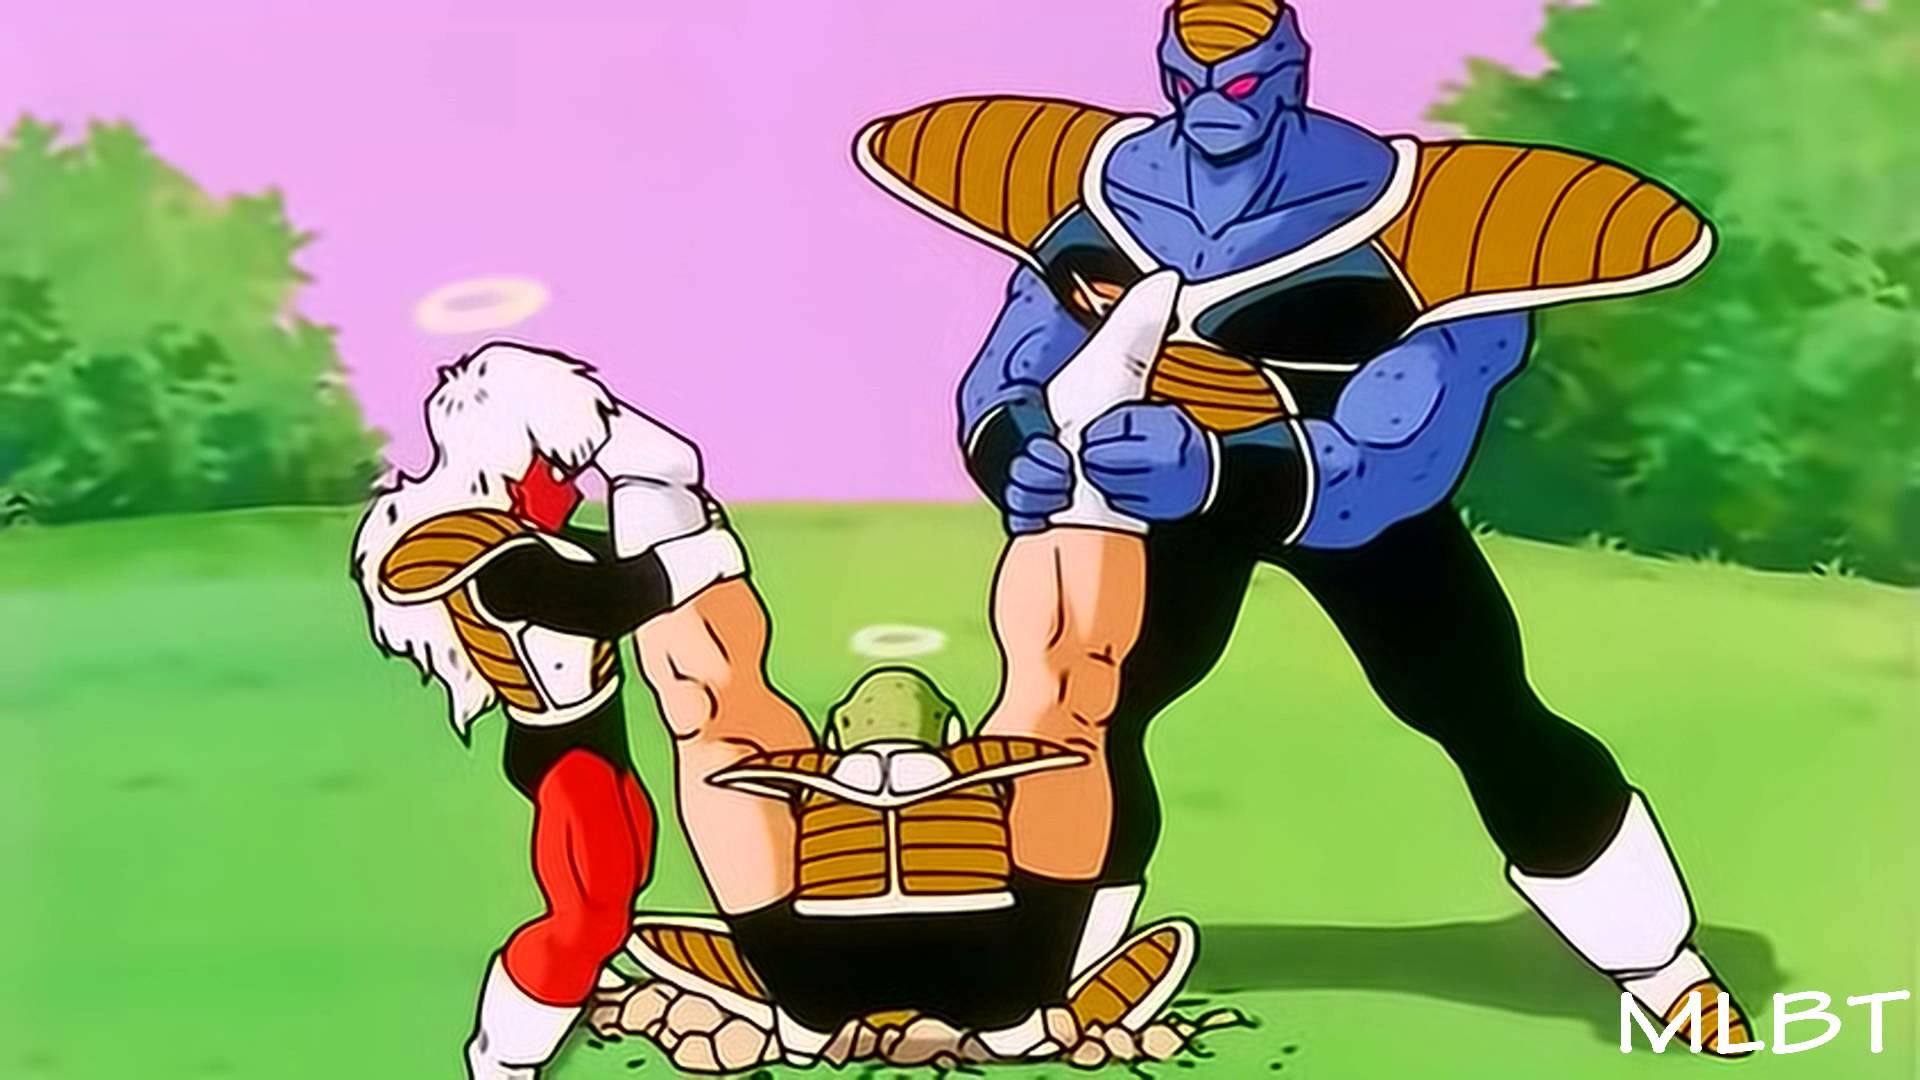 DBZ Z fighters vs Ginyu Force part 1 / 2 1080p HDremastered